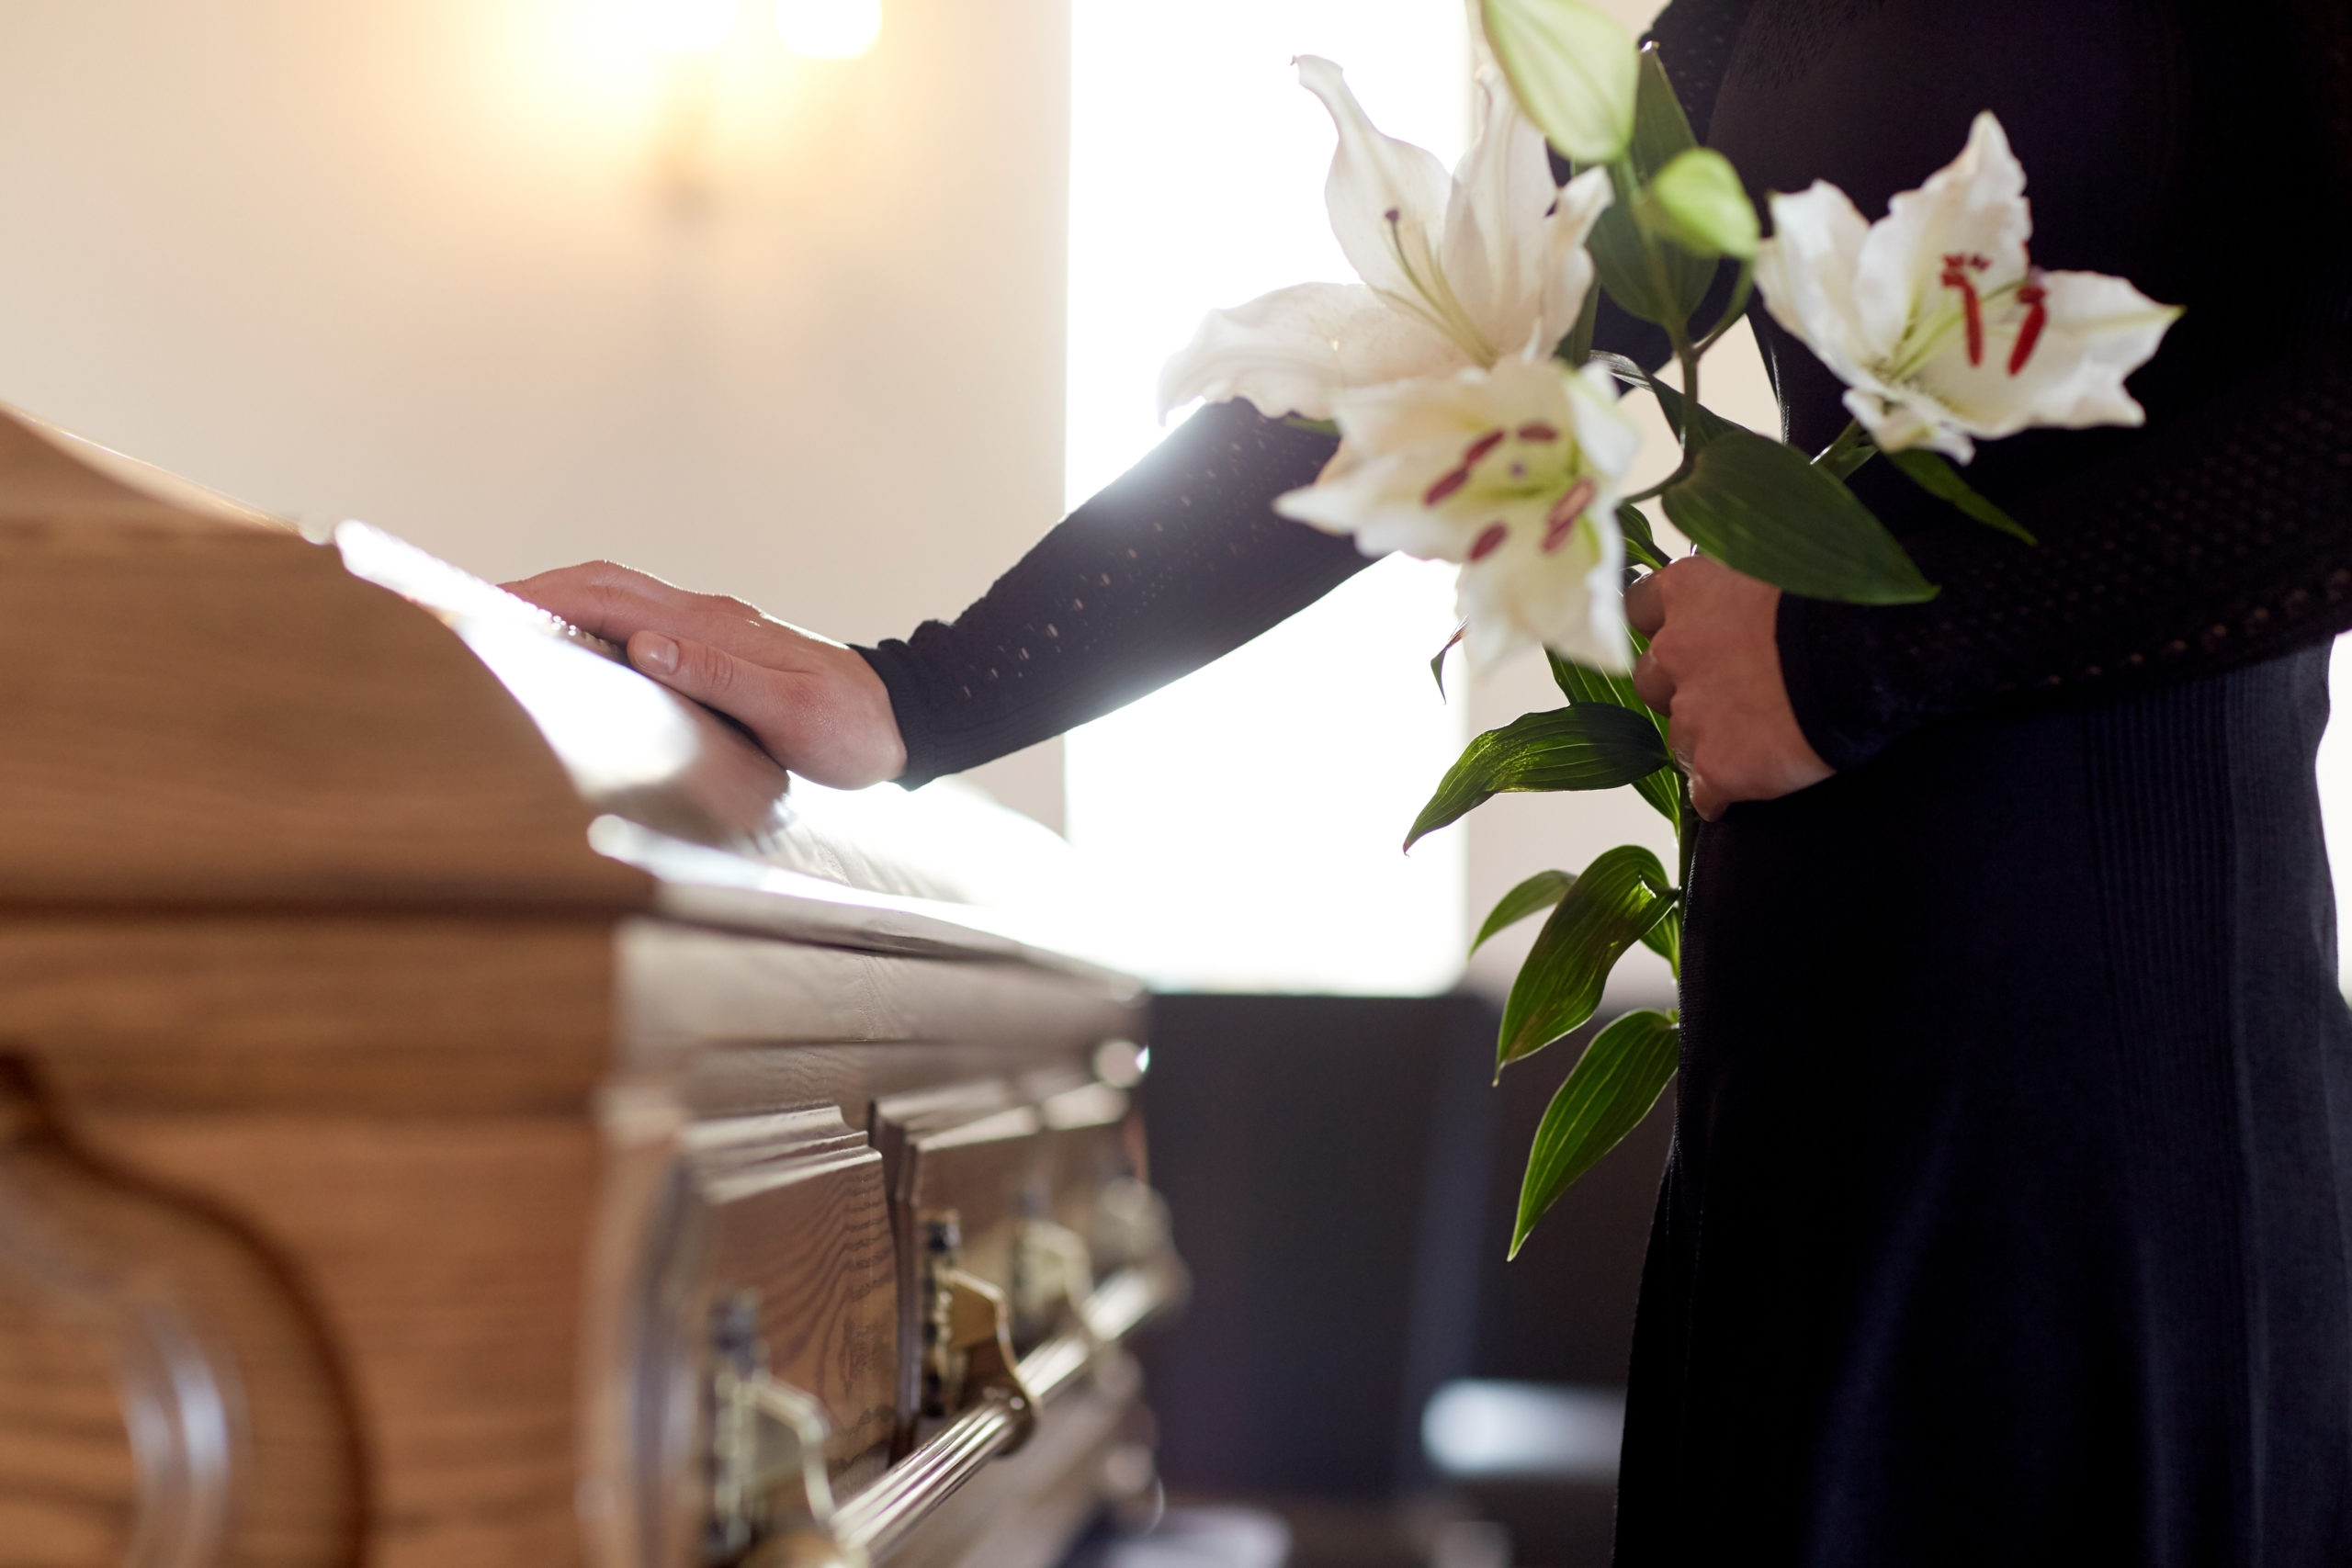 Funeral Industry Tapped For ‘Scared Straight’ Programs